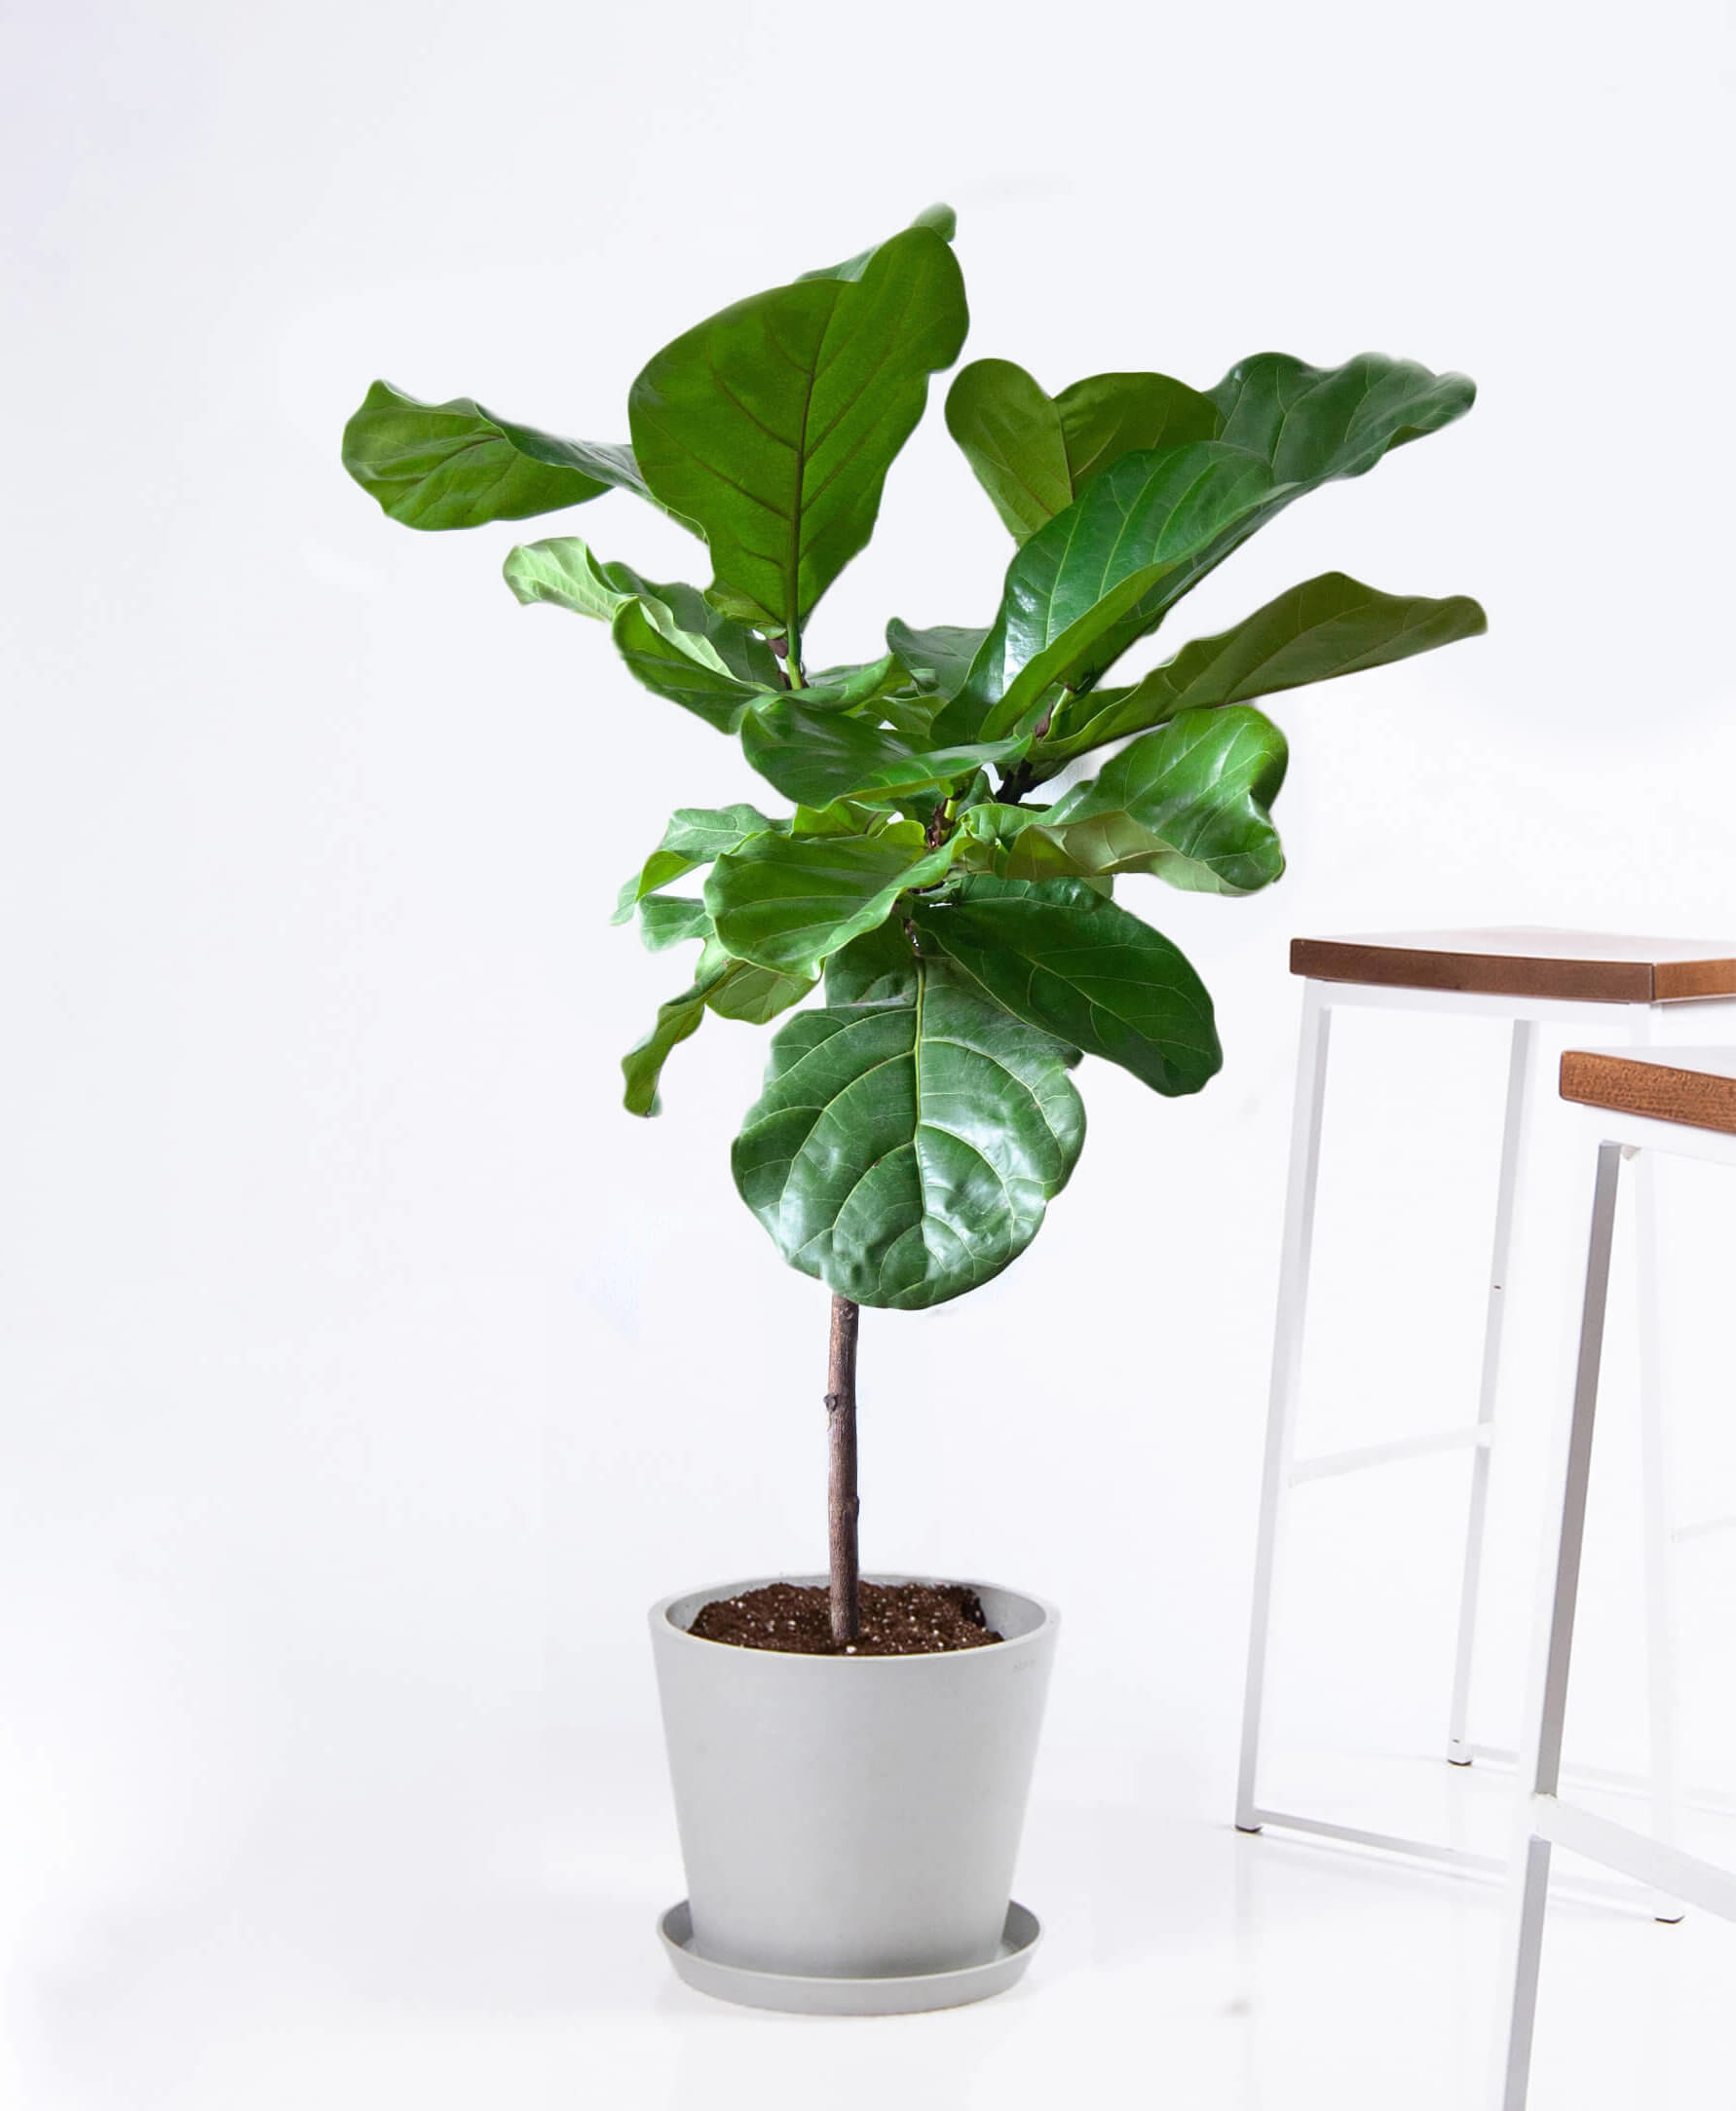 The fiddle leaf fig in a grey pot